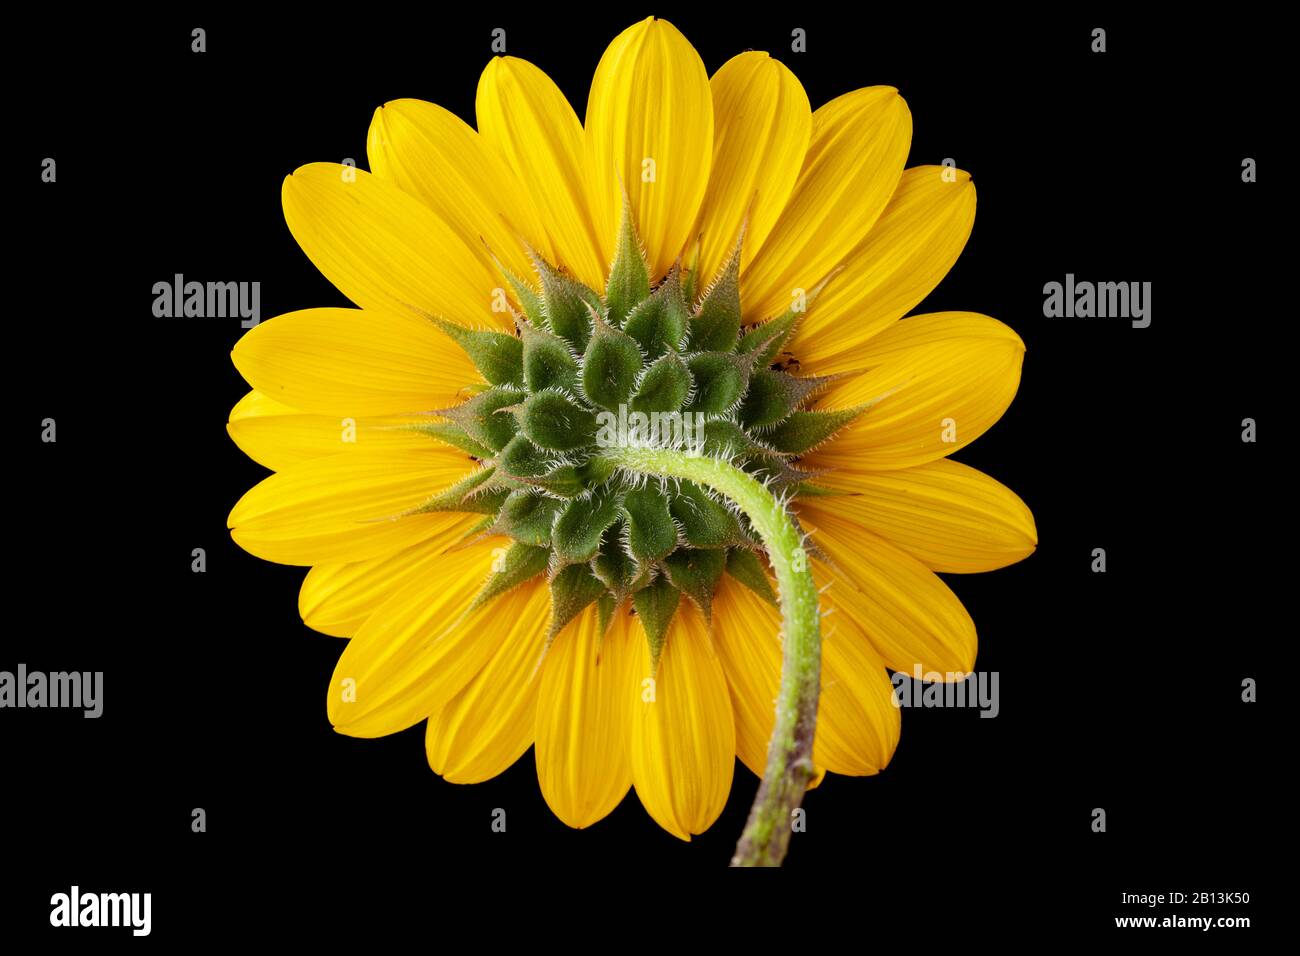 Back of sunflower isolated on black with the details of involucres arranged in a pattern Stock Photo